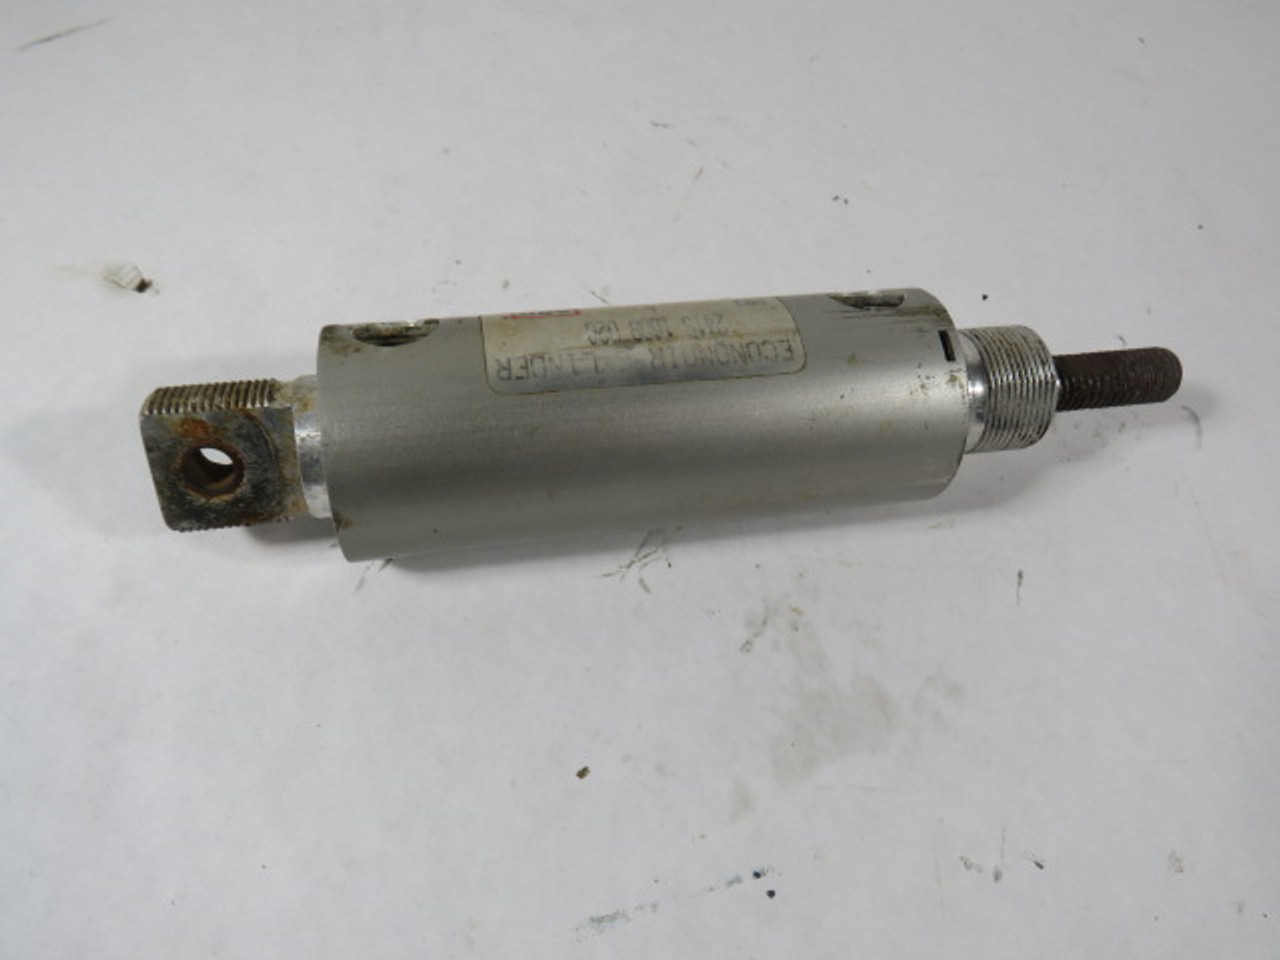 Ingersol Rand 2415-1009-020 Pneumatic Cylinder 1-1/2" Bore 4" Stroke USED